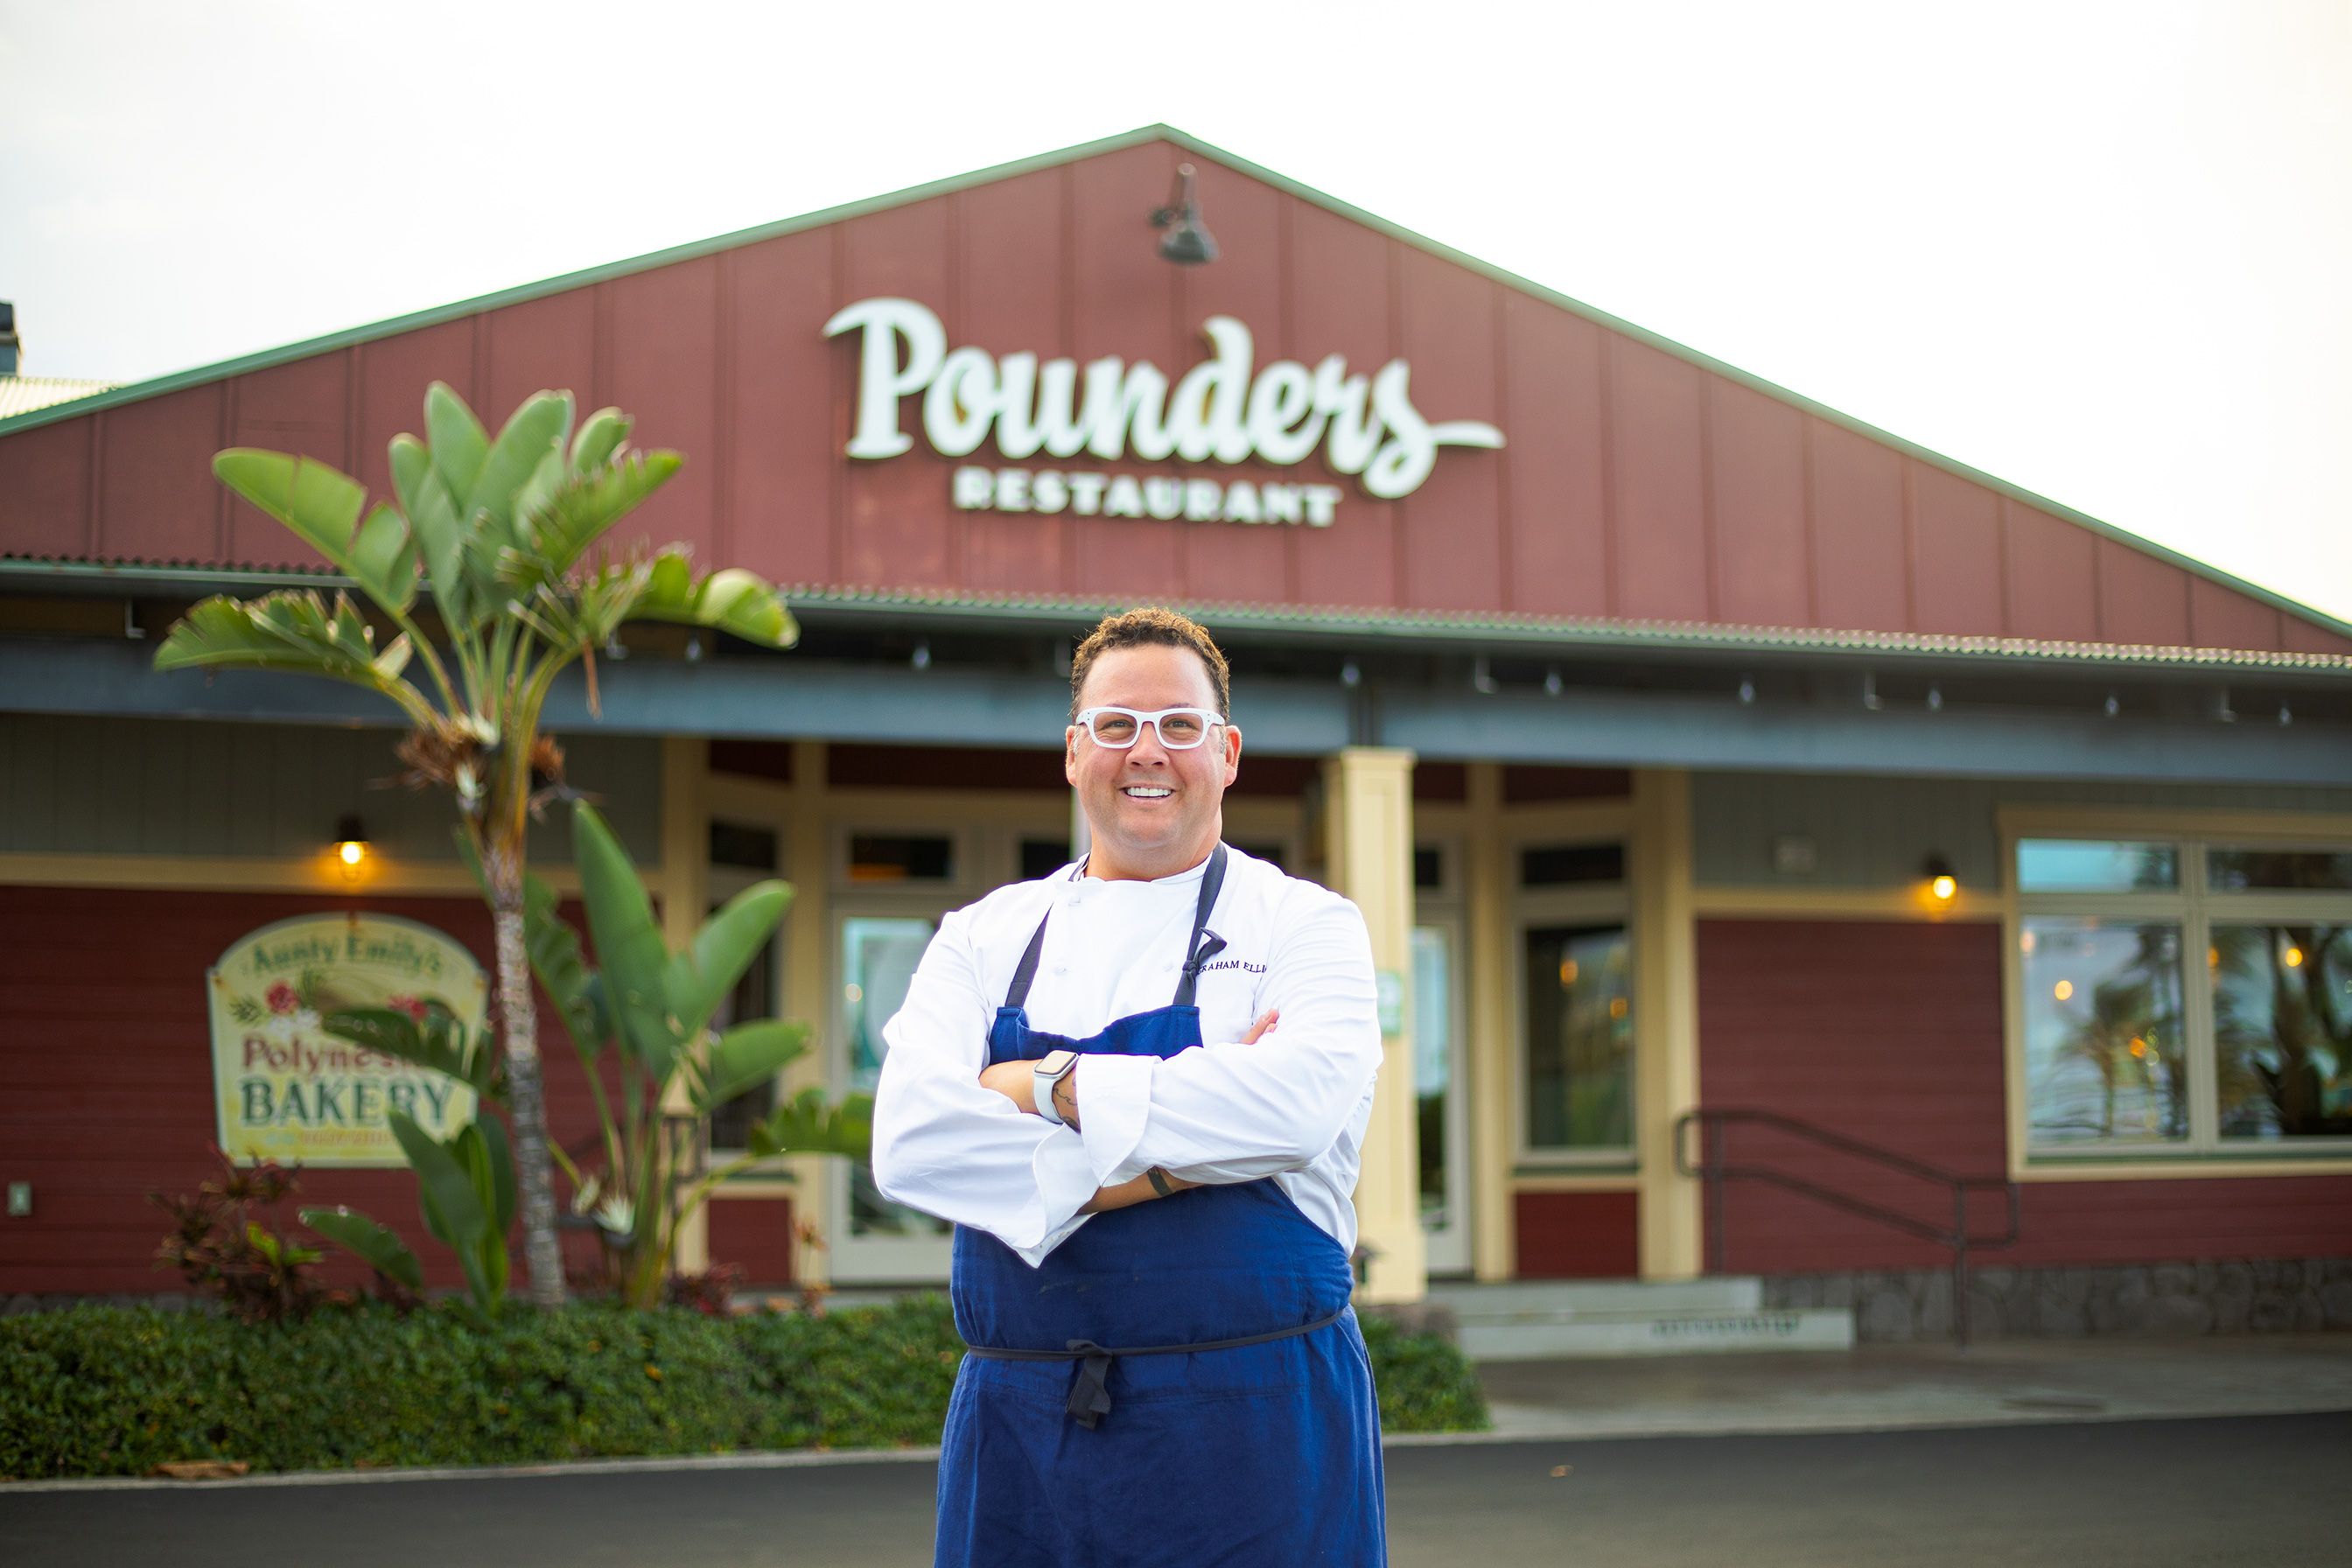 Graham Elliot named Executive Chef at Pounders